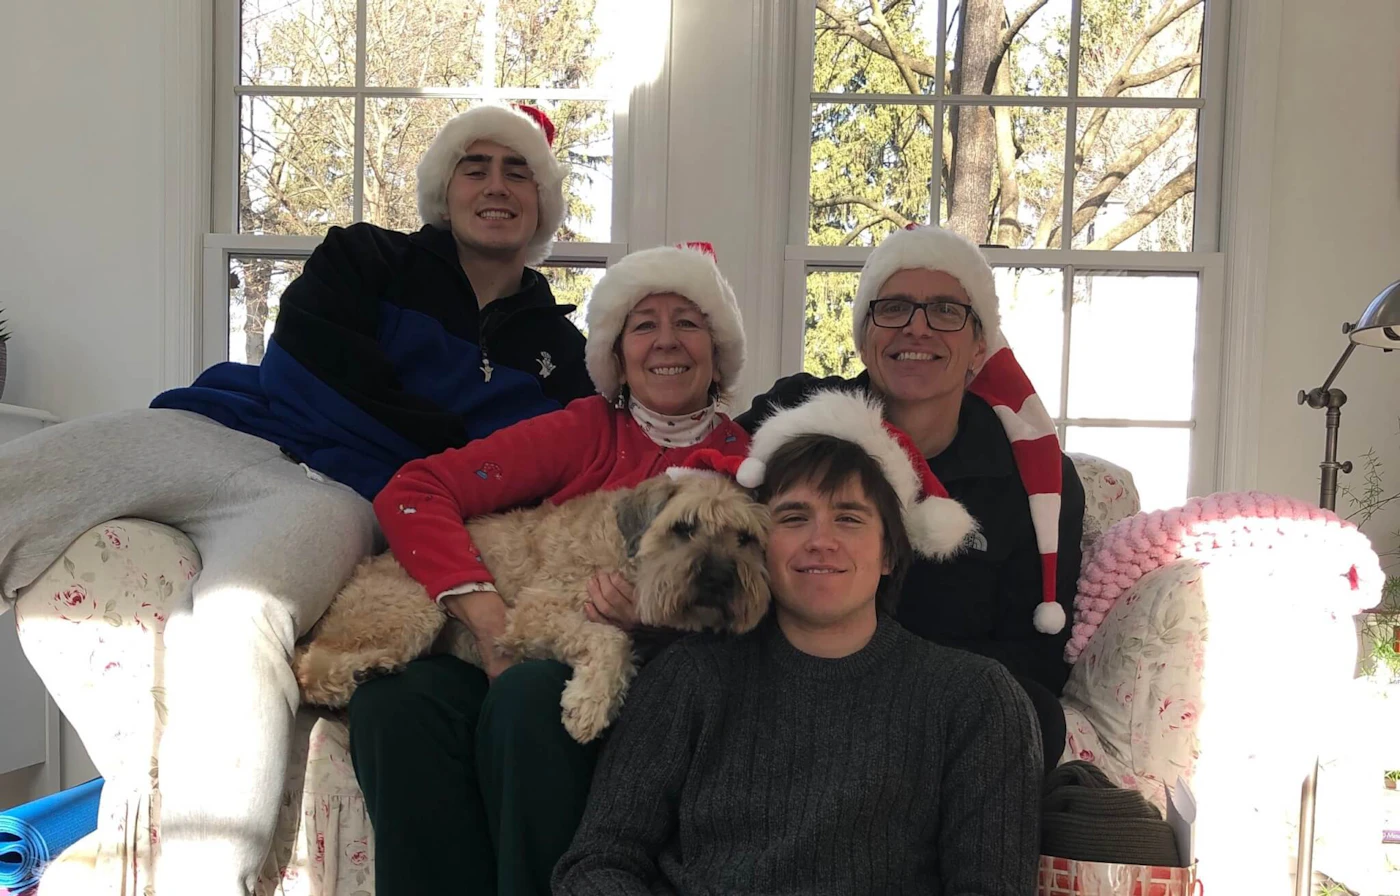 The Moon family, left to right, Gabriel, Joanne, Owen, and Kevin, on Christmas in 2019. Kevin will travel west to spend the holidays with Gabriel and Owen, while Joanne will remain isolated in their Bucks County home. (Courtesy of Joanne Moon)